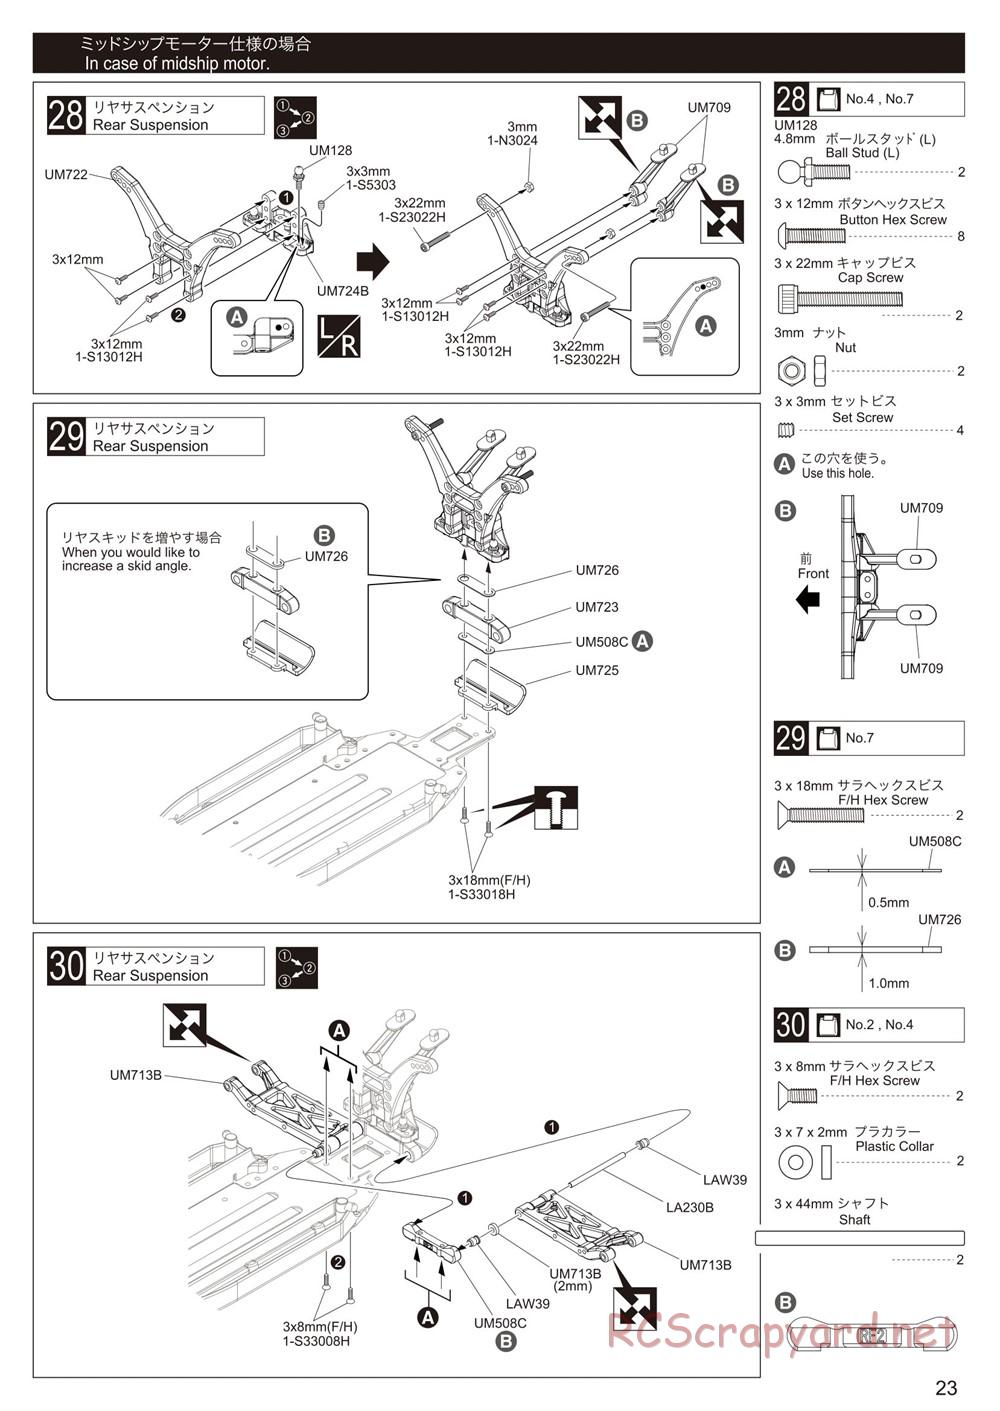 Kyosho - Ultima RB6 (2015) - Manual - Page 23